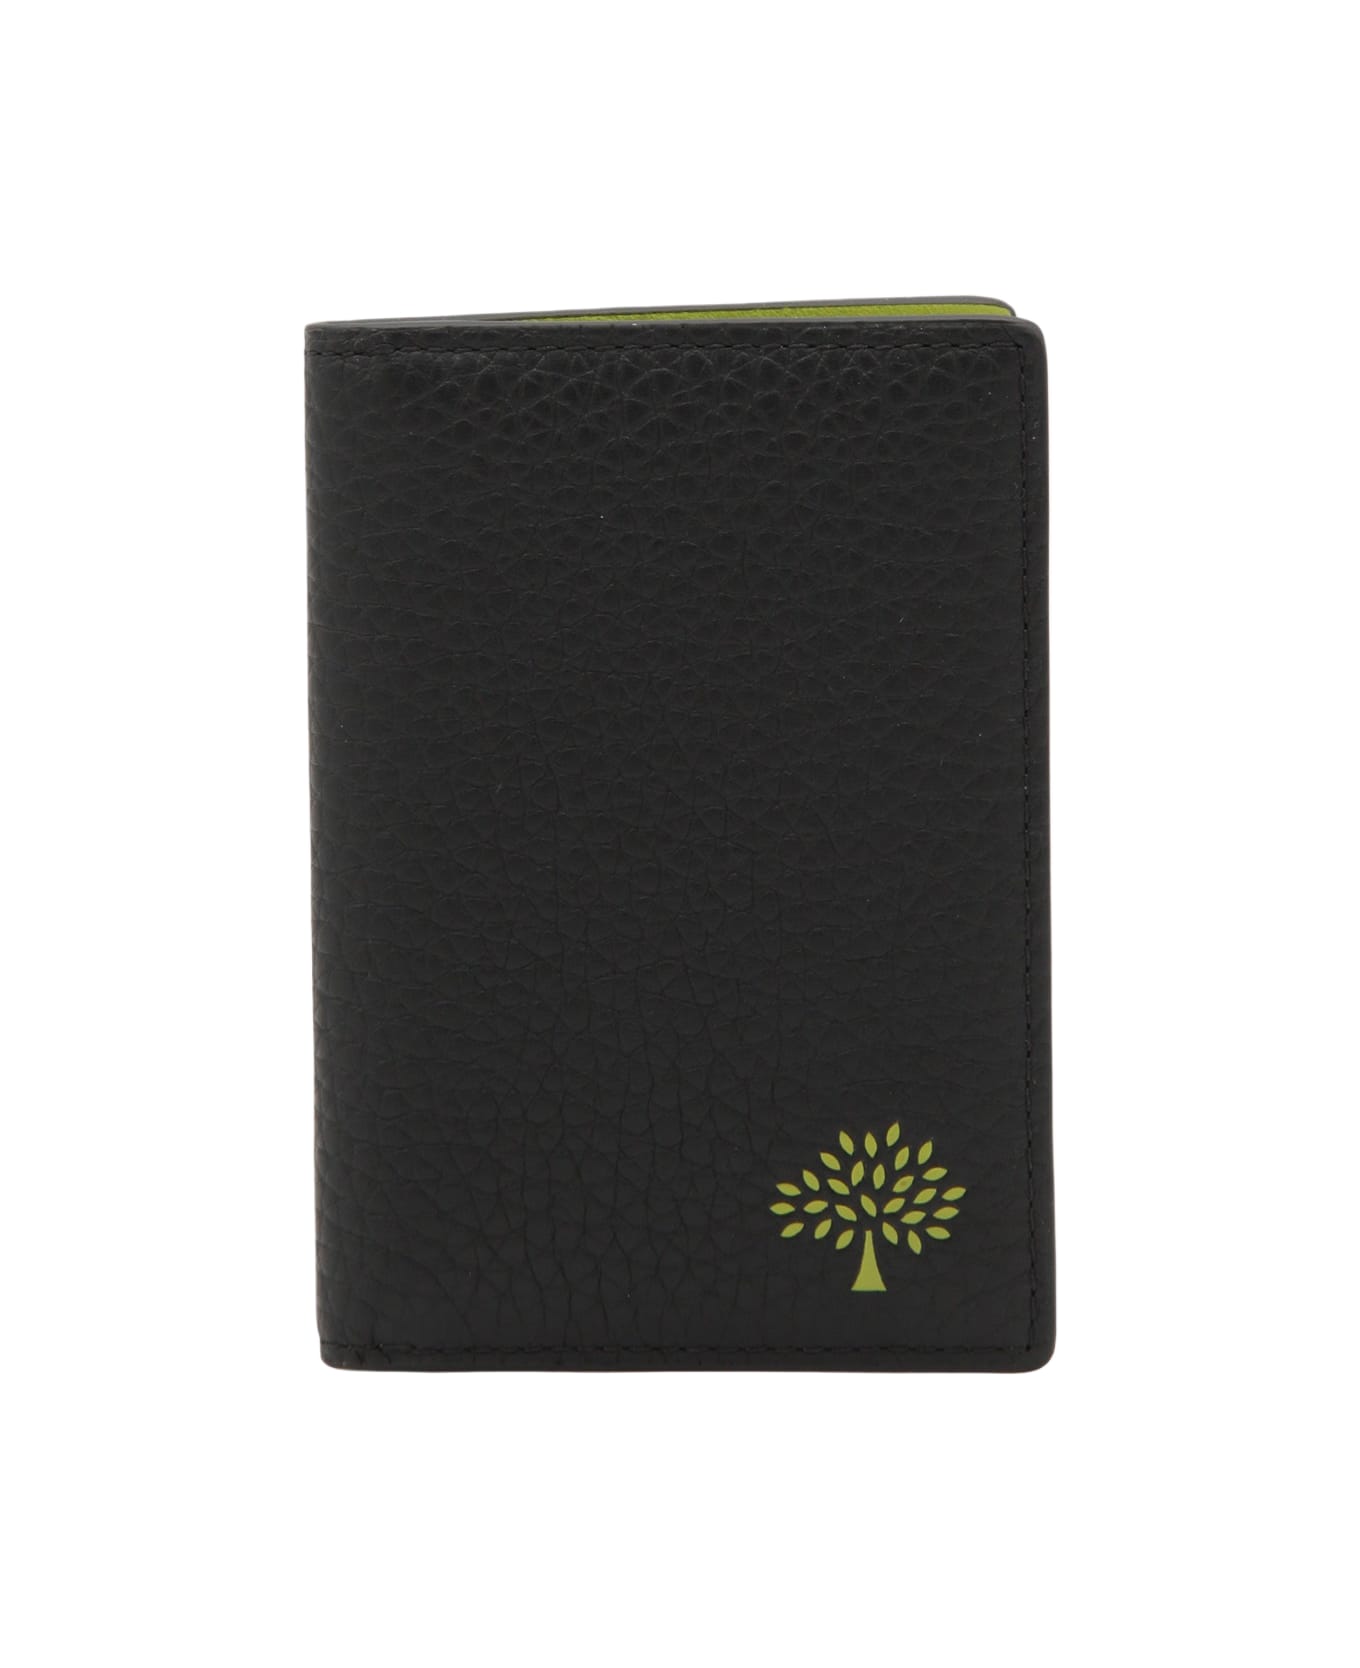 Mulberry Black Leather Wallet - Black